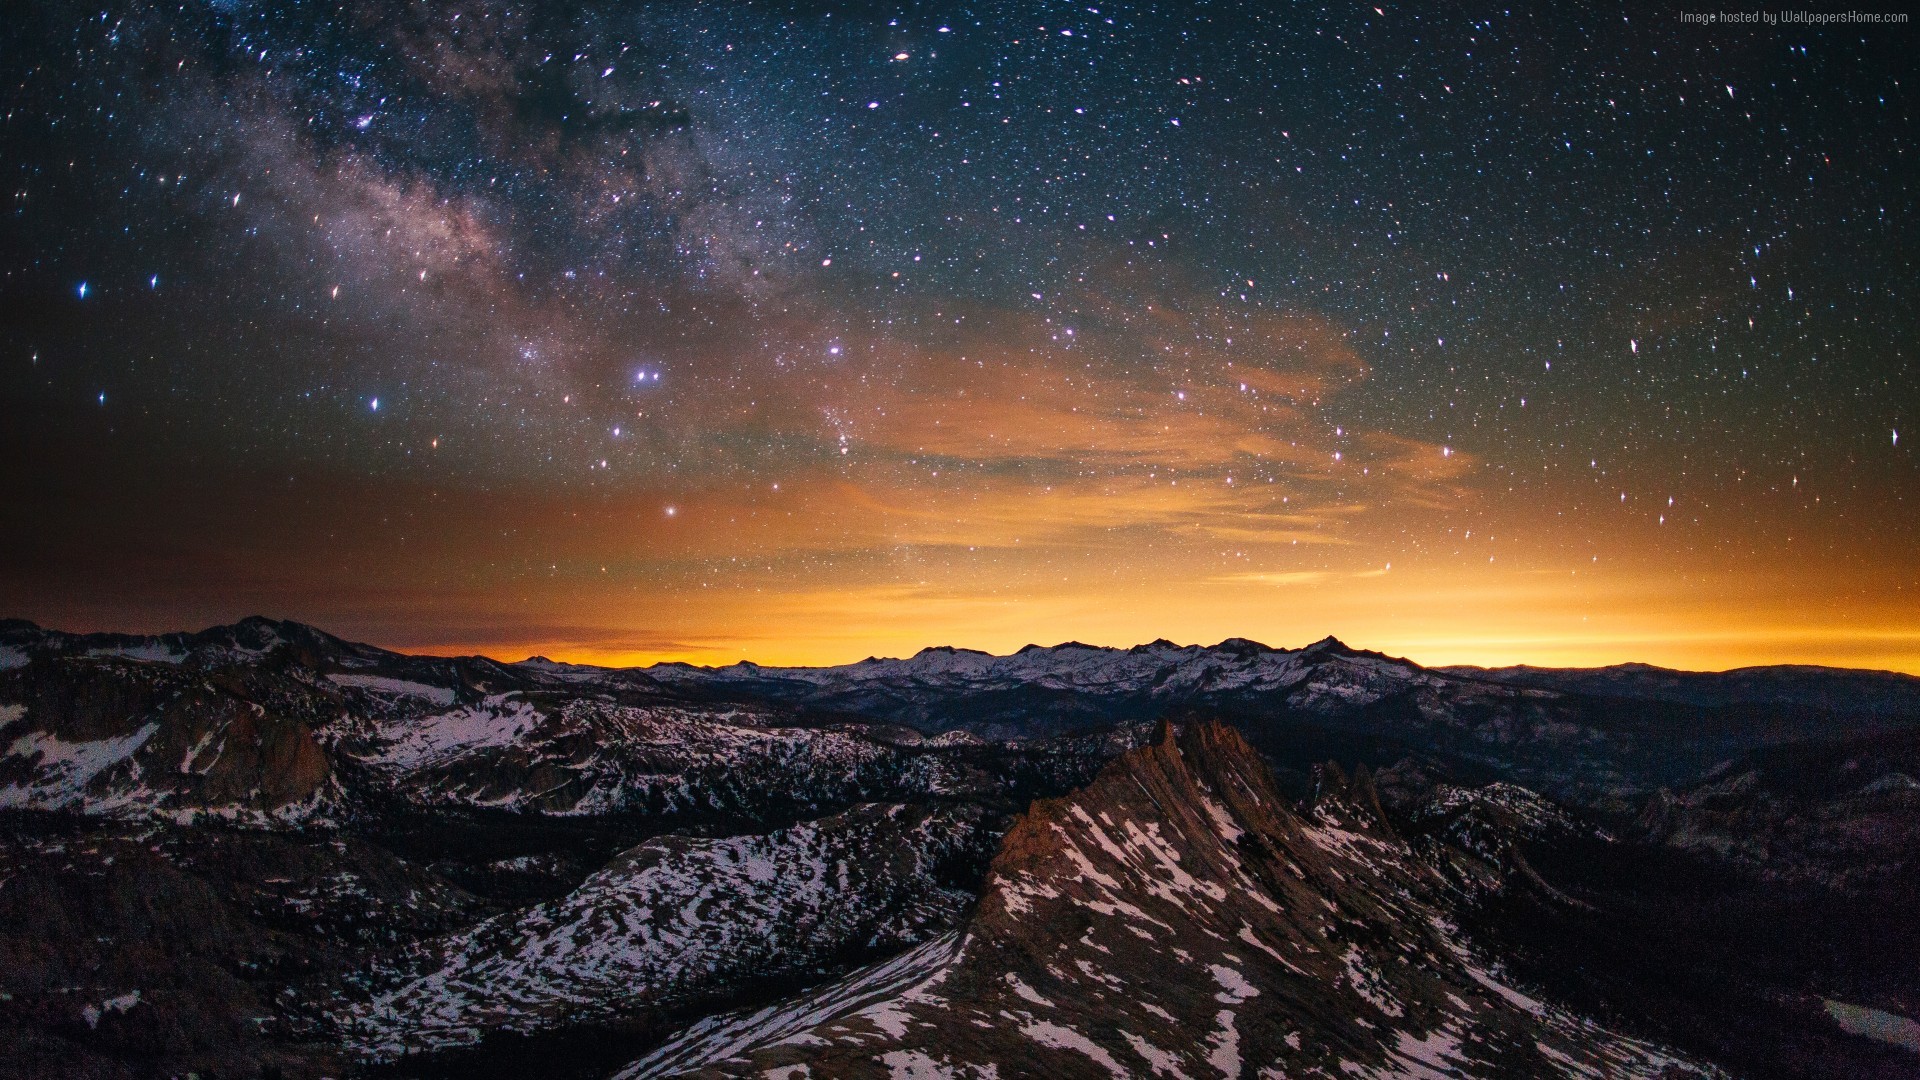 General 1920x1080 nature landscape sunset mountains Milky Way starry night skyscape sky stars